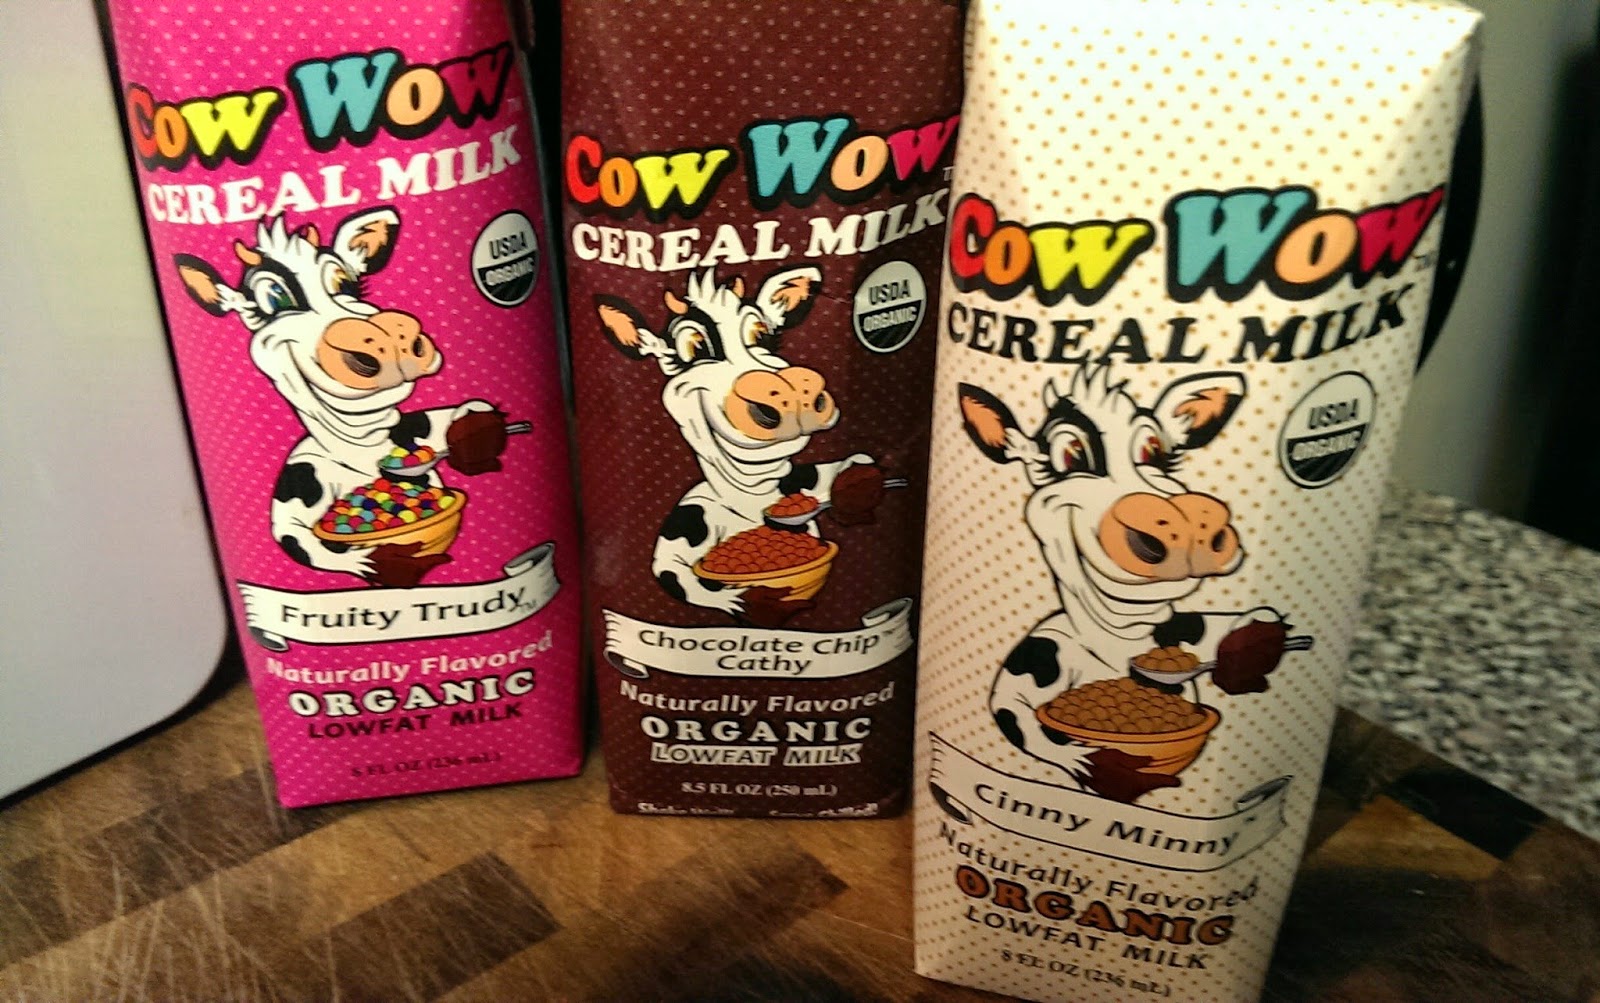 Cow+Wow Best Milk For Kids - Cow Wow Cereal Milk